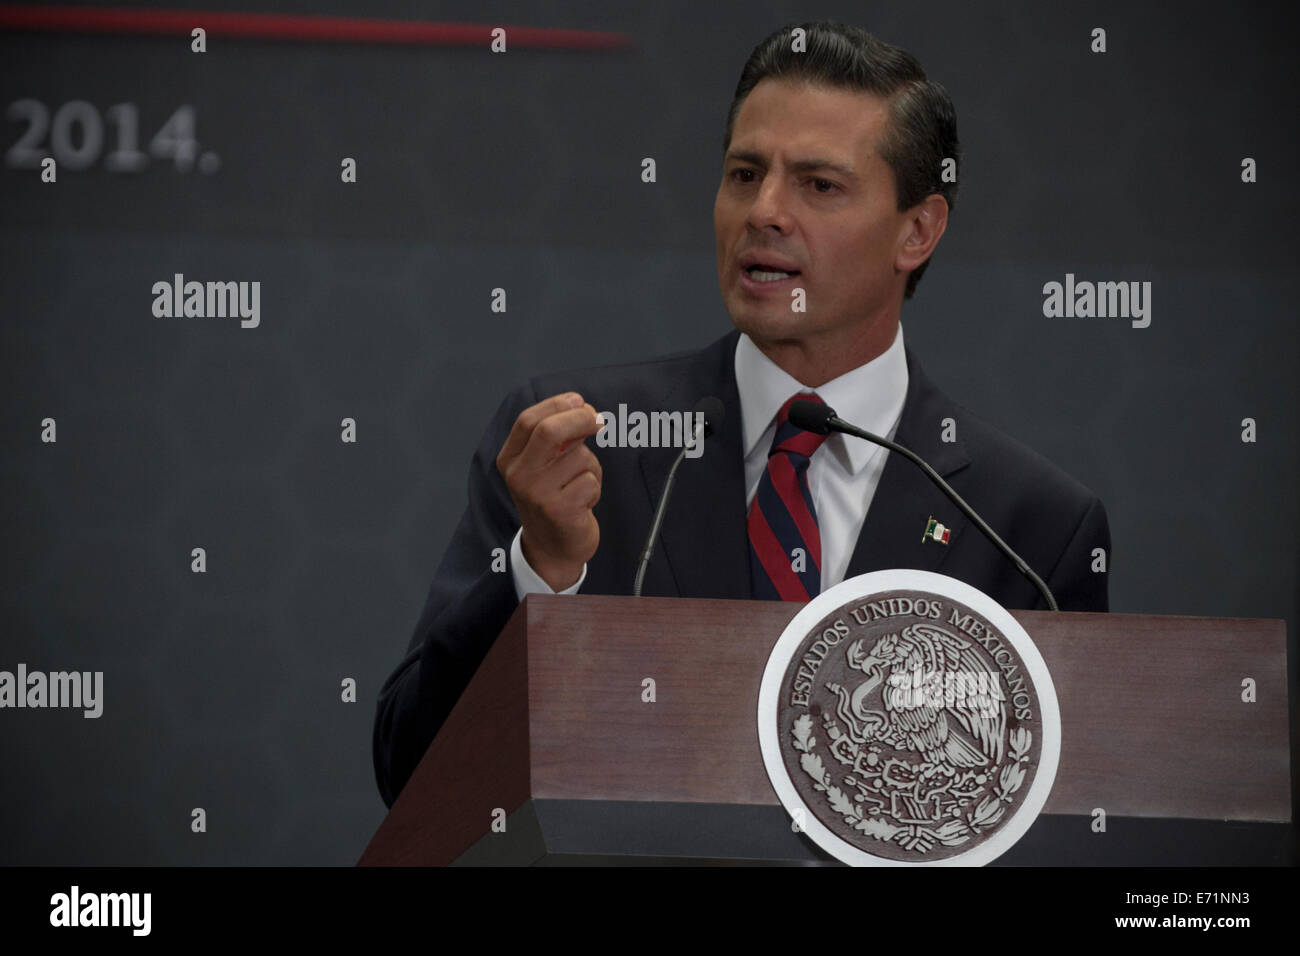 Mexico City, Mexico. 3rd Sep, 2014. The Mexican President, Enrique Pena Nieto, delivers a speech during a ceremony to announce the winning design for the new international airport in Mexico City, Mexico, on Sept. 3, 2014. British architect Norman Foster and Mexico's Fernando Romero were announced here to be the winners for the design contract of Mexcio City's new airport. With a budget of 9.23 billion U.S. dollars, the new airport will have six landing strips and serve 126 million passengers a year Credit:  Xinhua/Alamy Live News Stock Photo